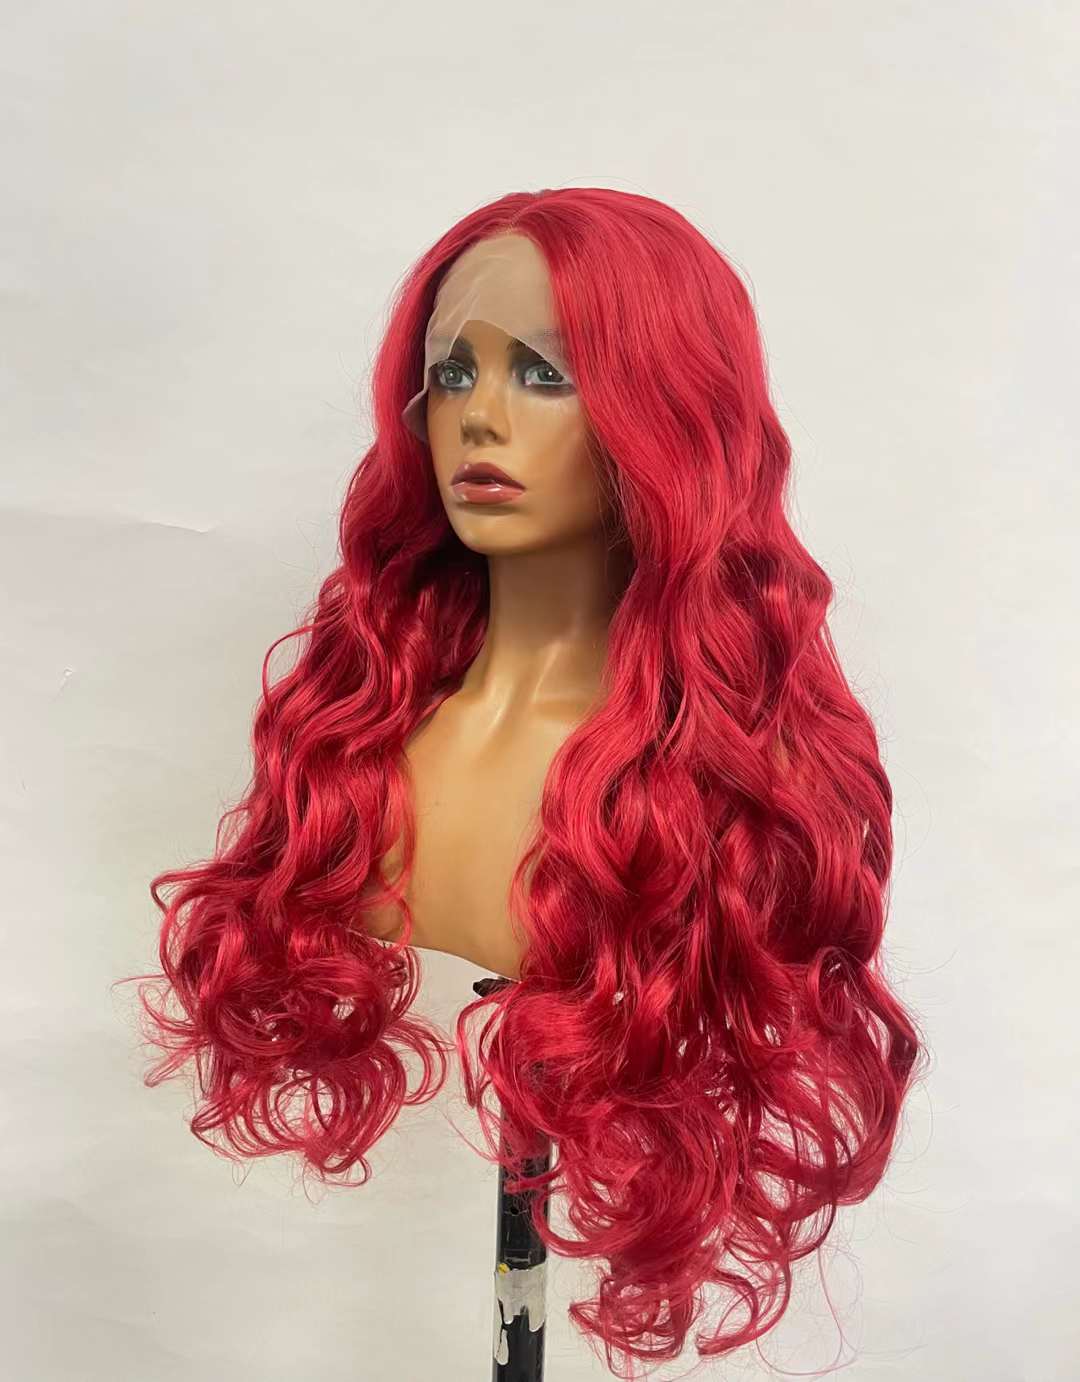 Cherry red Long Body Wave Hair Wig